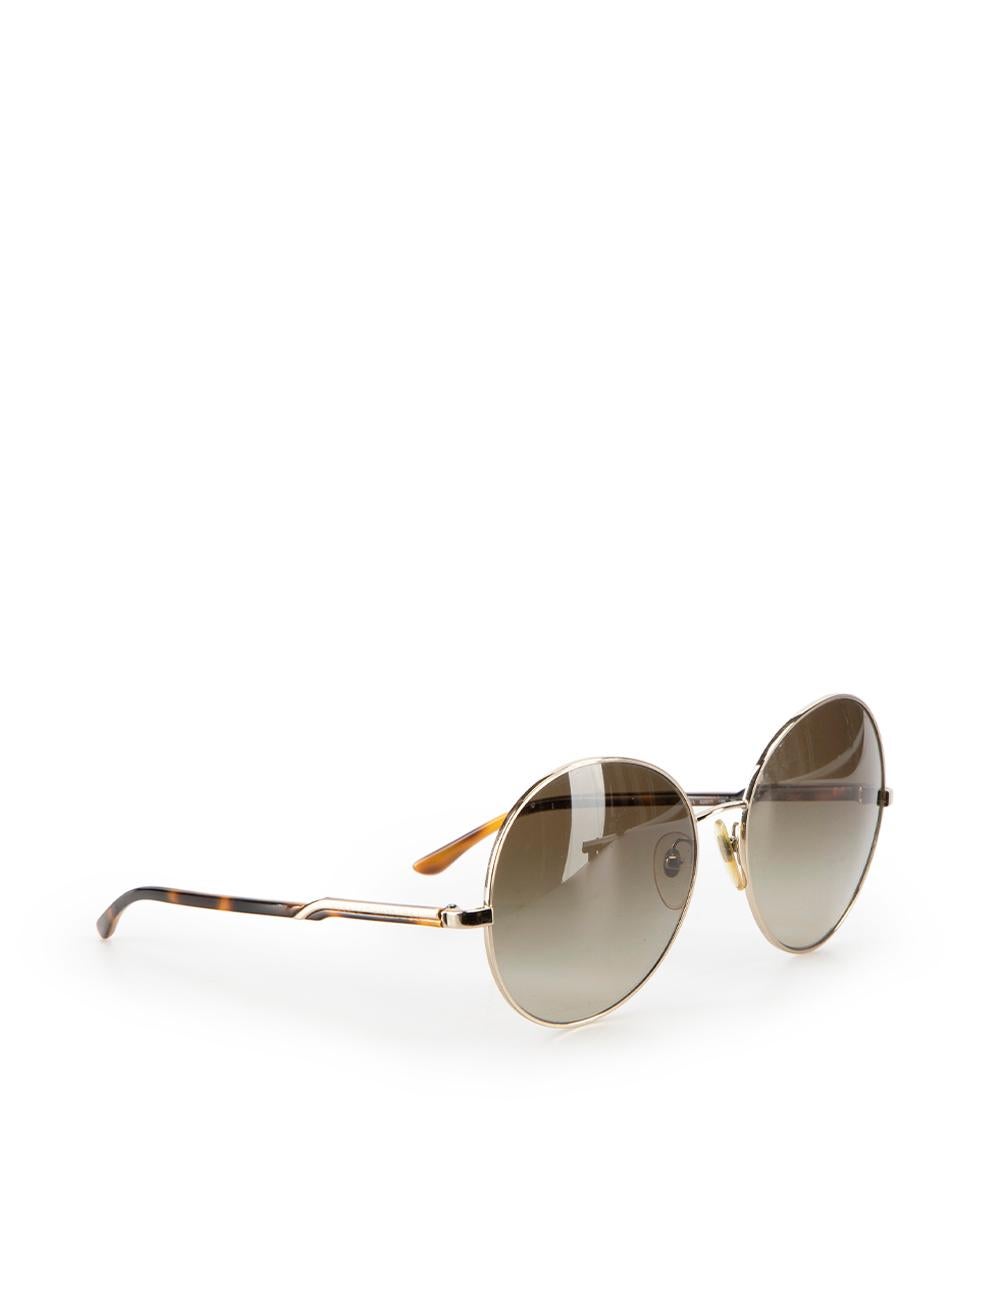 CONDITION is Very good. Minimal wear to sunglasses is evident. Minimal wear to the right arm tip with scratches on this used Stella McCartney designer resale item.



Details


Brown

Metal

Sunglasses

Round oversized frames

Tortoiseshell